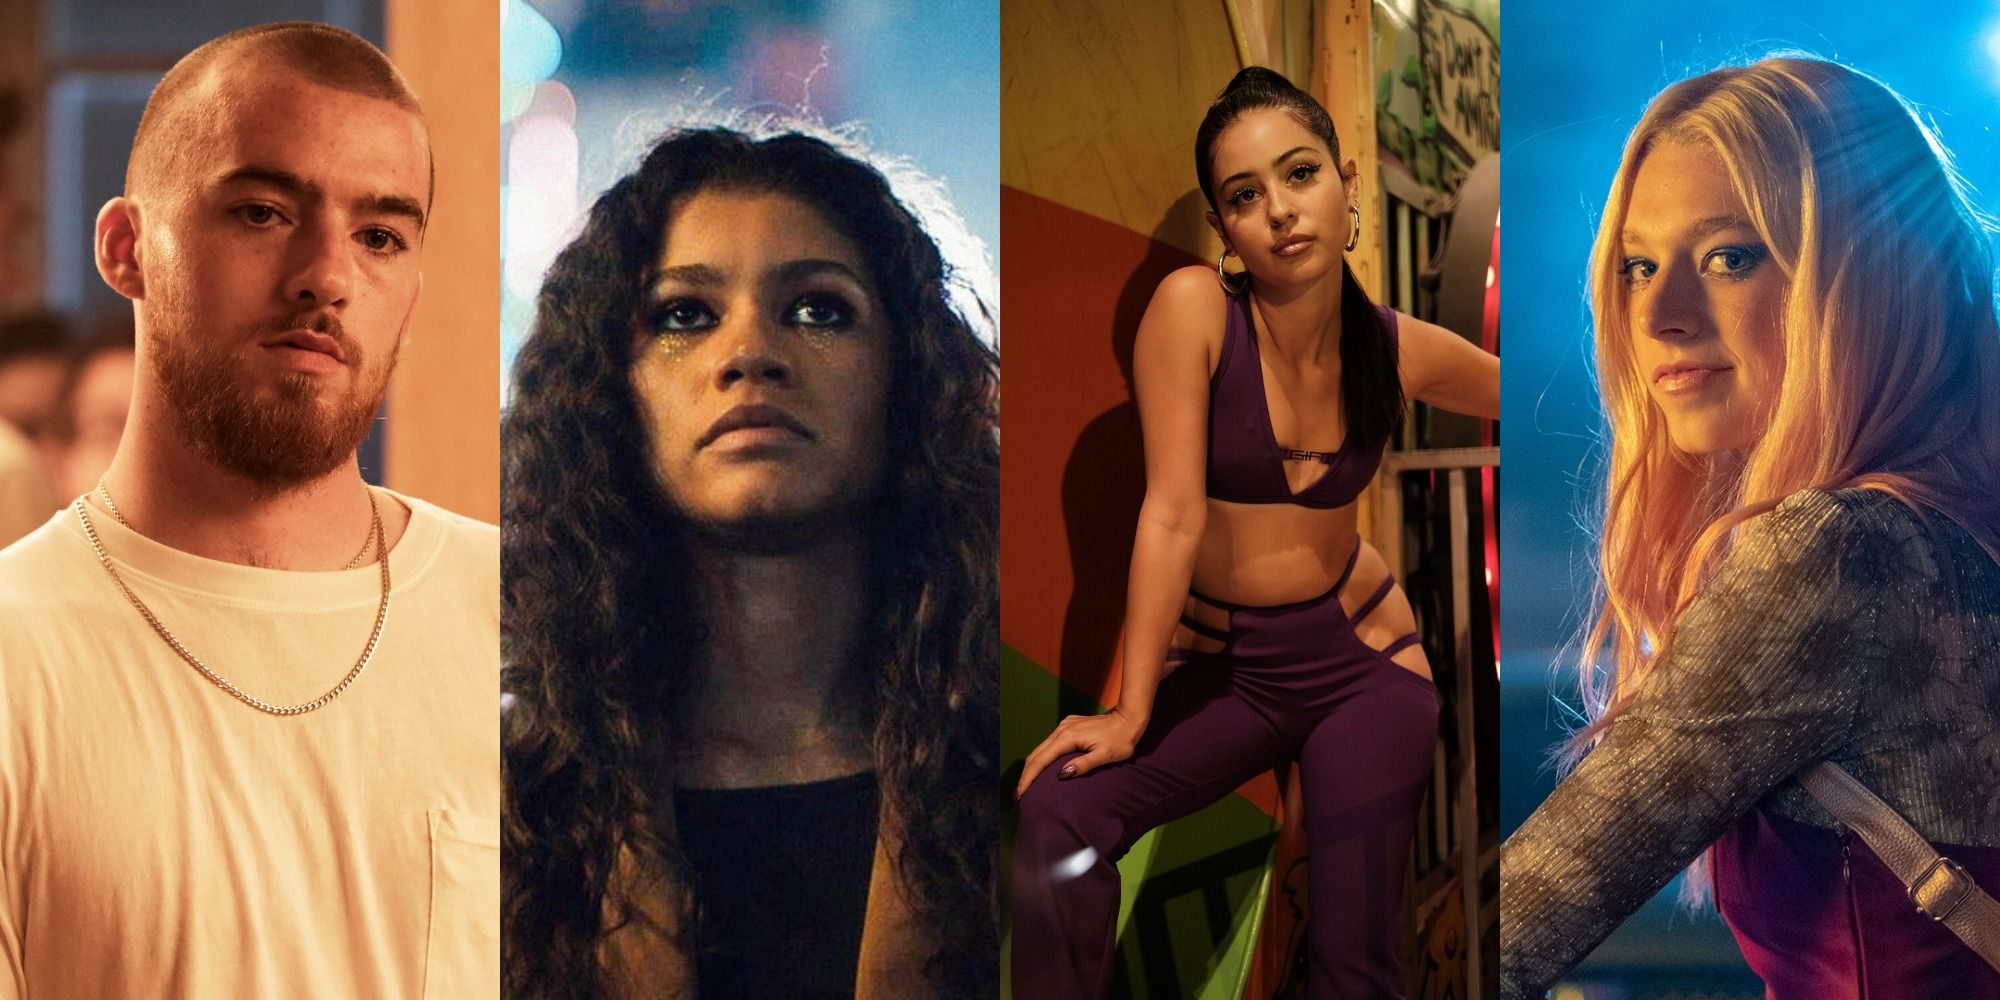 Side by side images of Fez, Rue, Maddy, and Jules in Euphoria